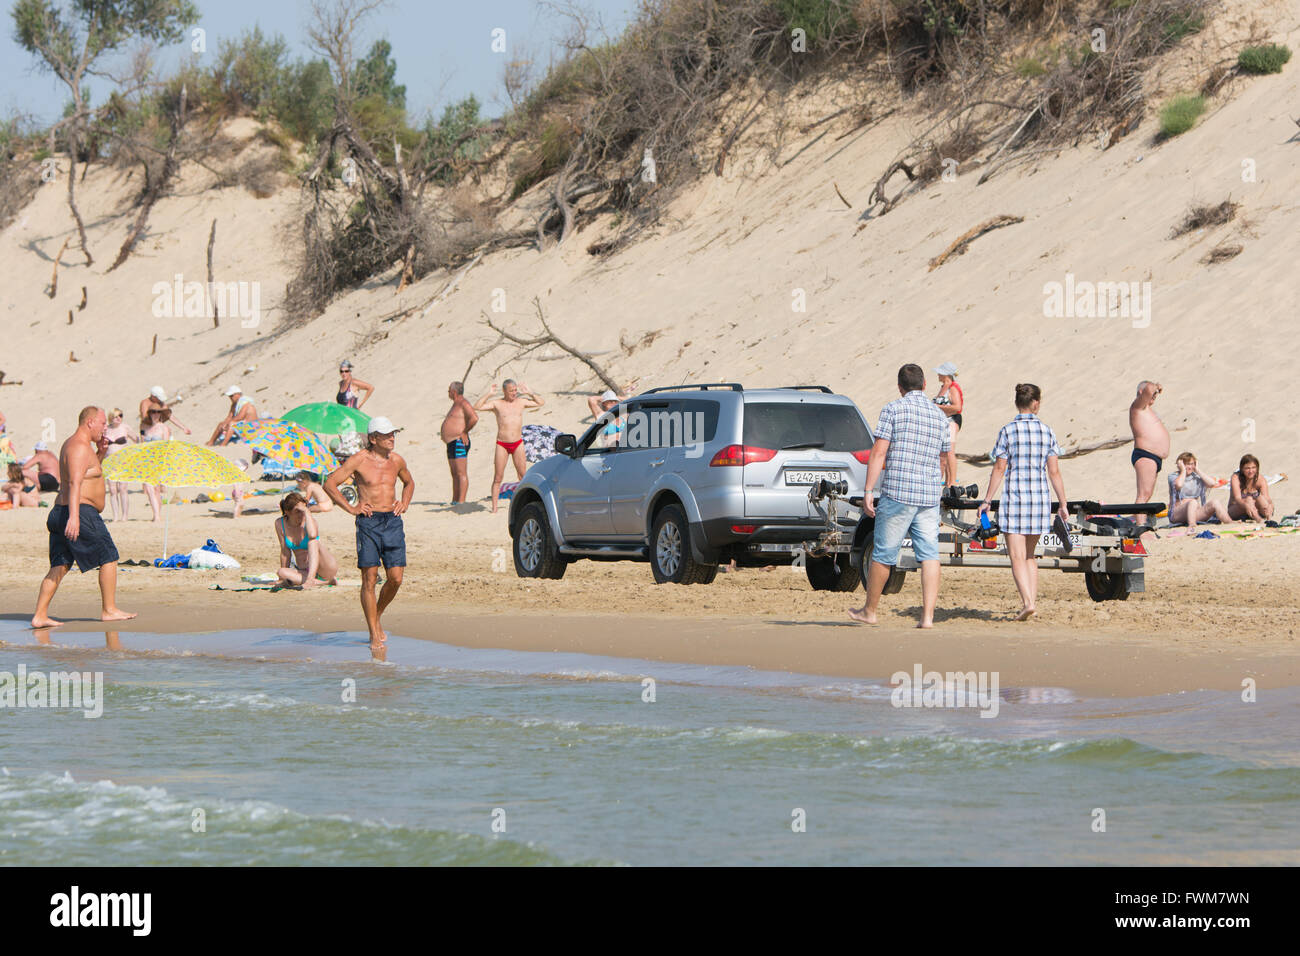 Anapa, Russia - September 20, 2015: Jeep with insolent driver rides on the beach with holidaymakers Stock Photo